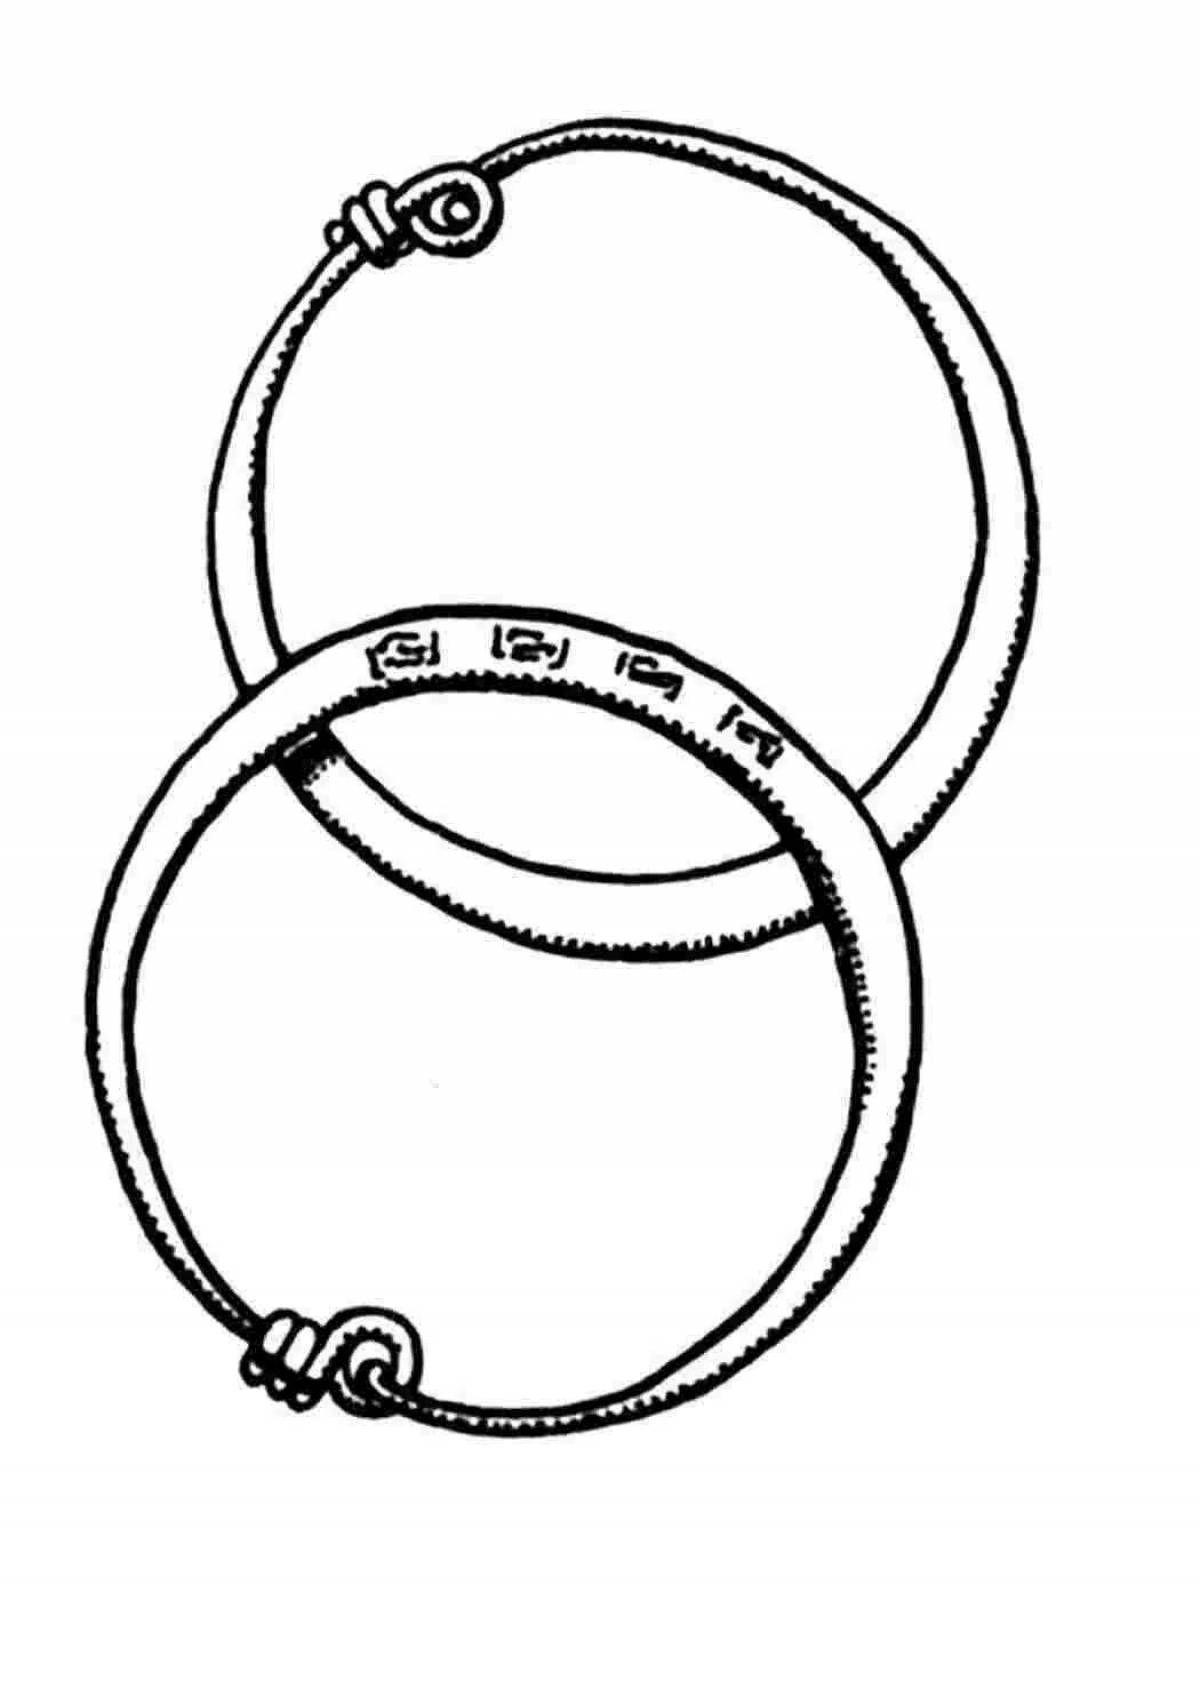 Colorful ring coloring page for kids